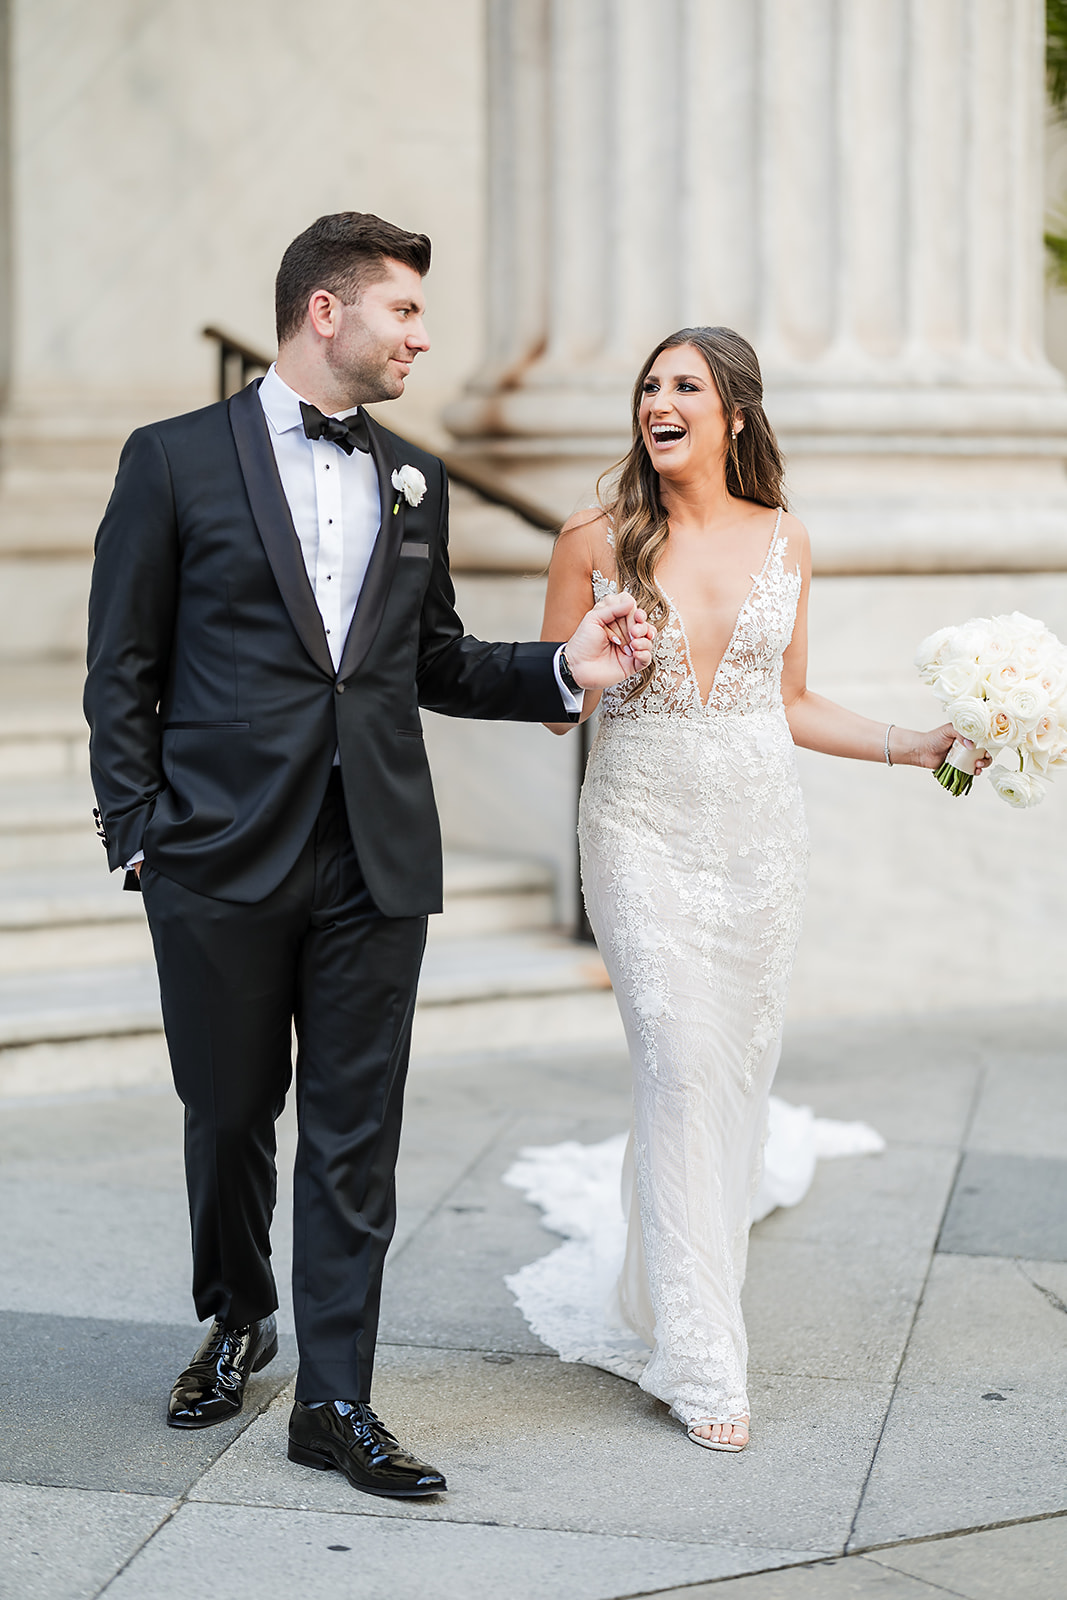 Bride and groom laughing effortlessly at the steps of the Ritz Carlton Hotel in Philadelphia